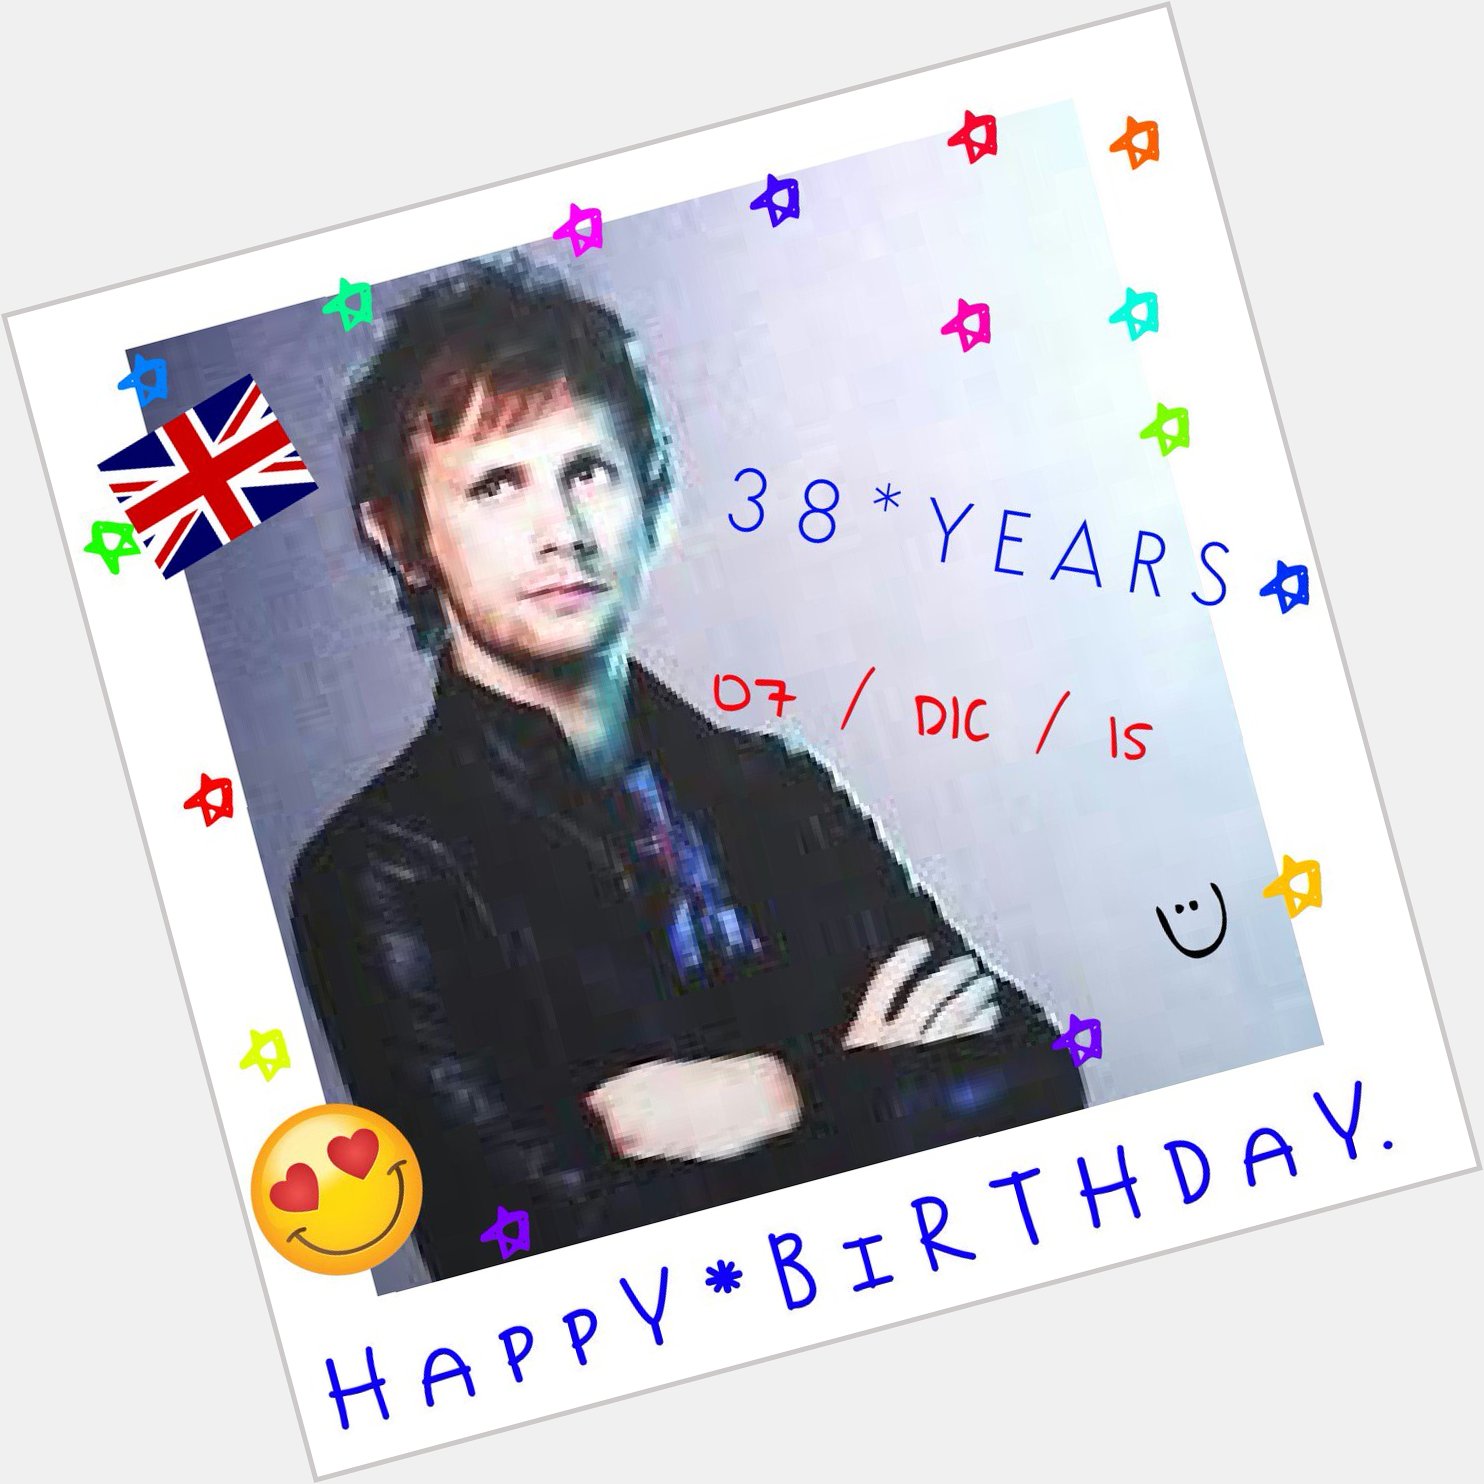  Dom! The best drummer in the world
Happy birthday 
I wish you well today and always 